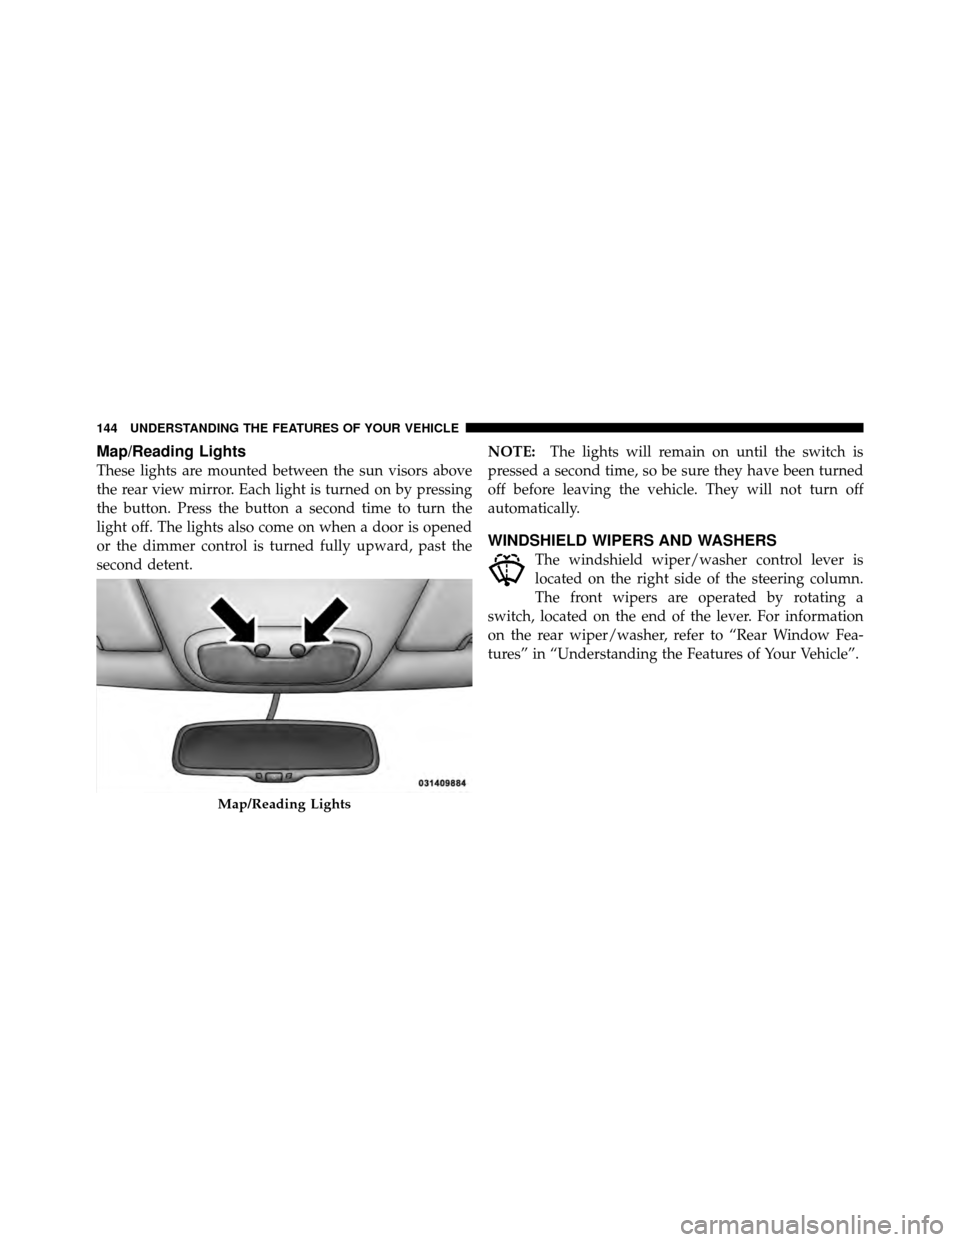 JEEP COMPASS 2010 1.G Owners Manual Map/Reading Lights
These lights are mounted between the sun visors above
the rear view mirror. Each light is turned on by pressing
the button. Press the button a second time to turn the
light off. The